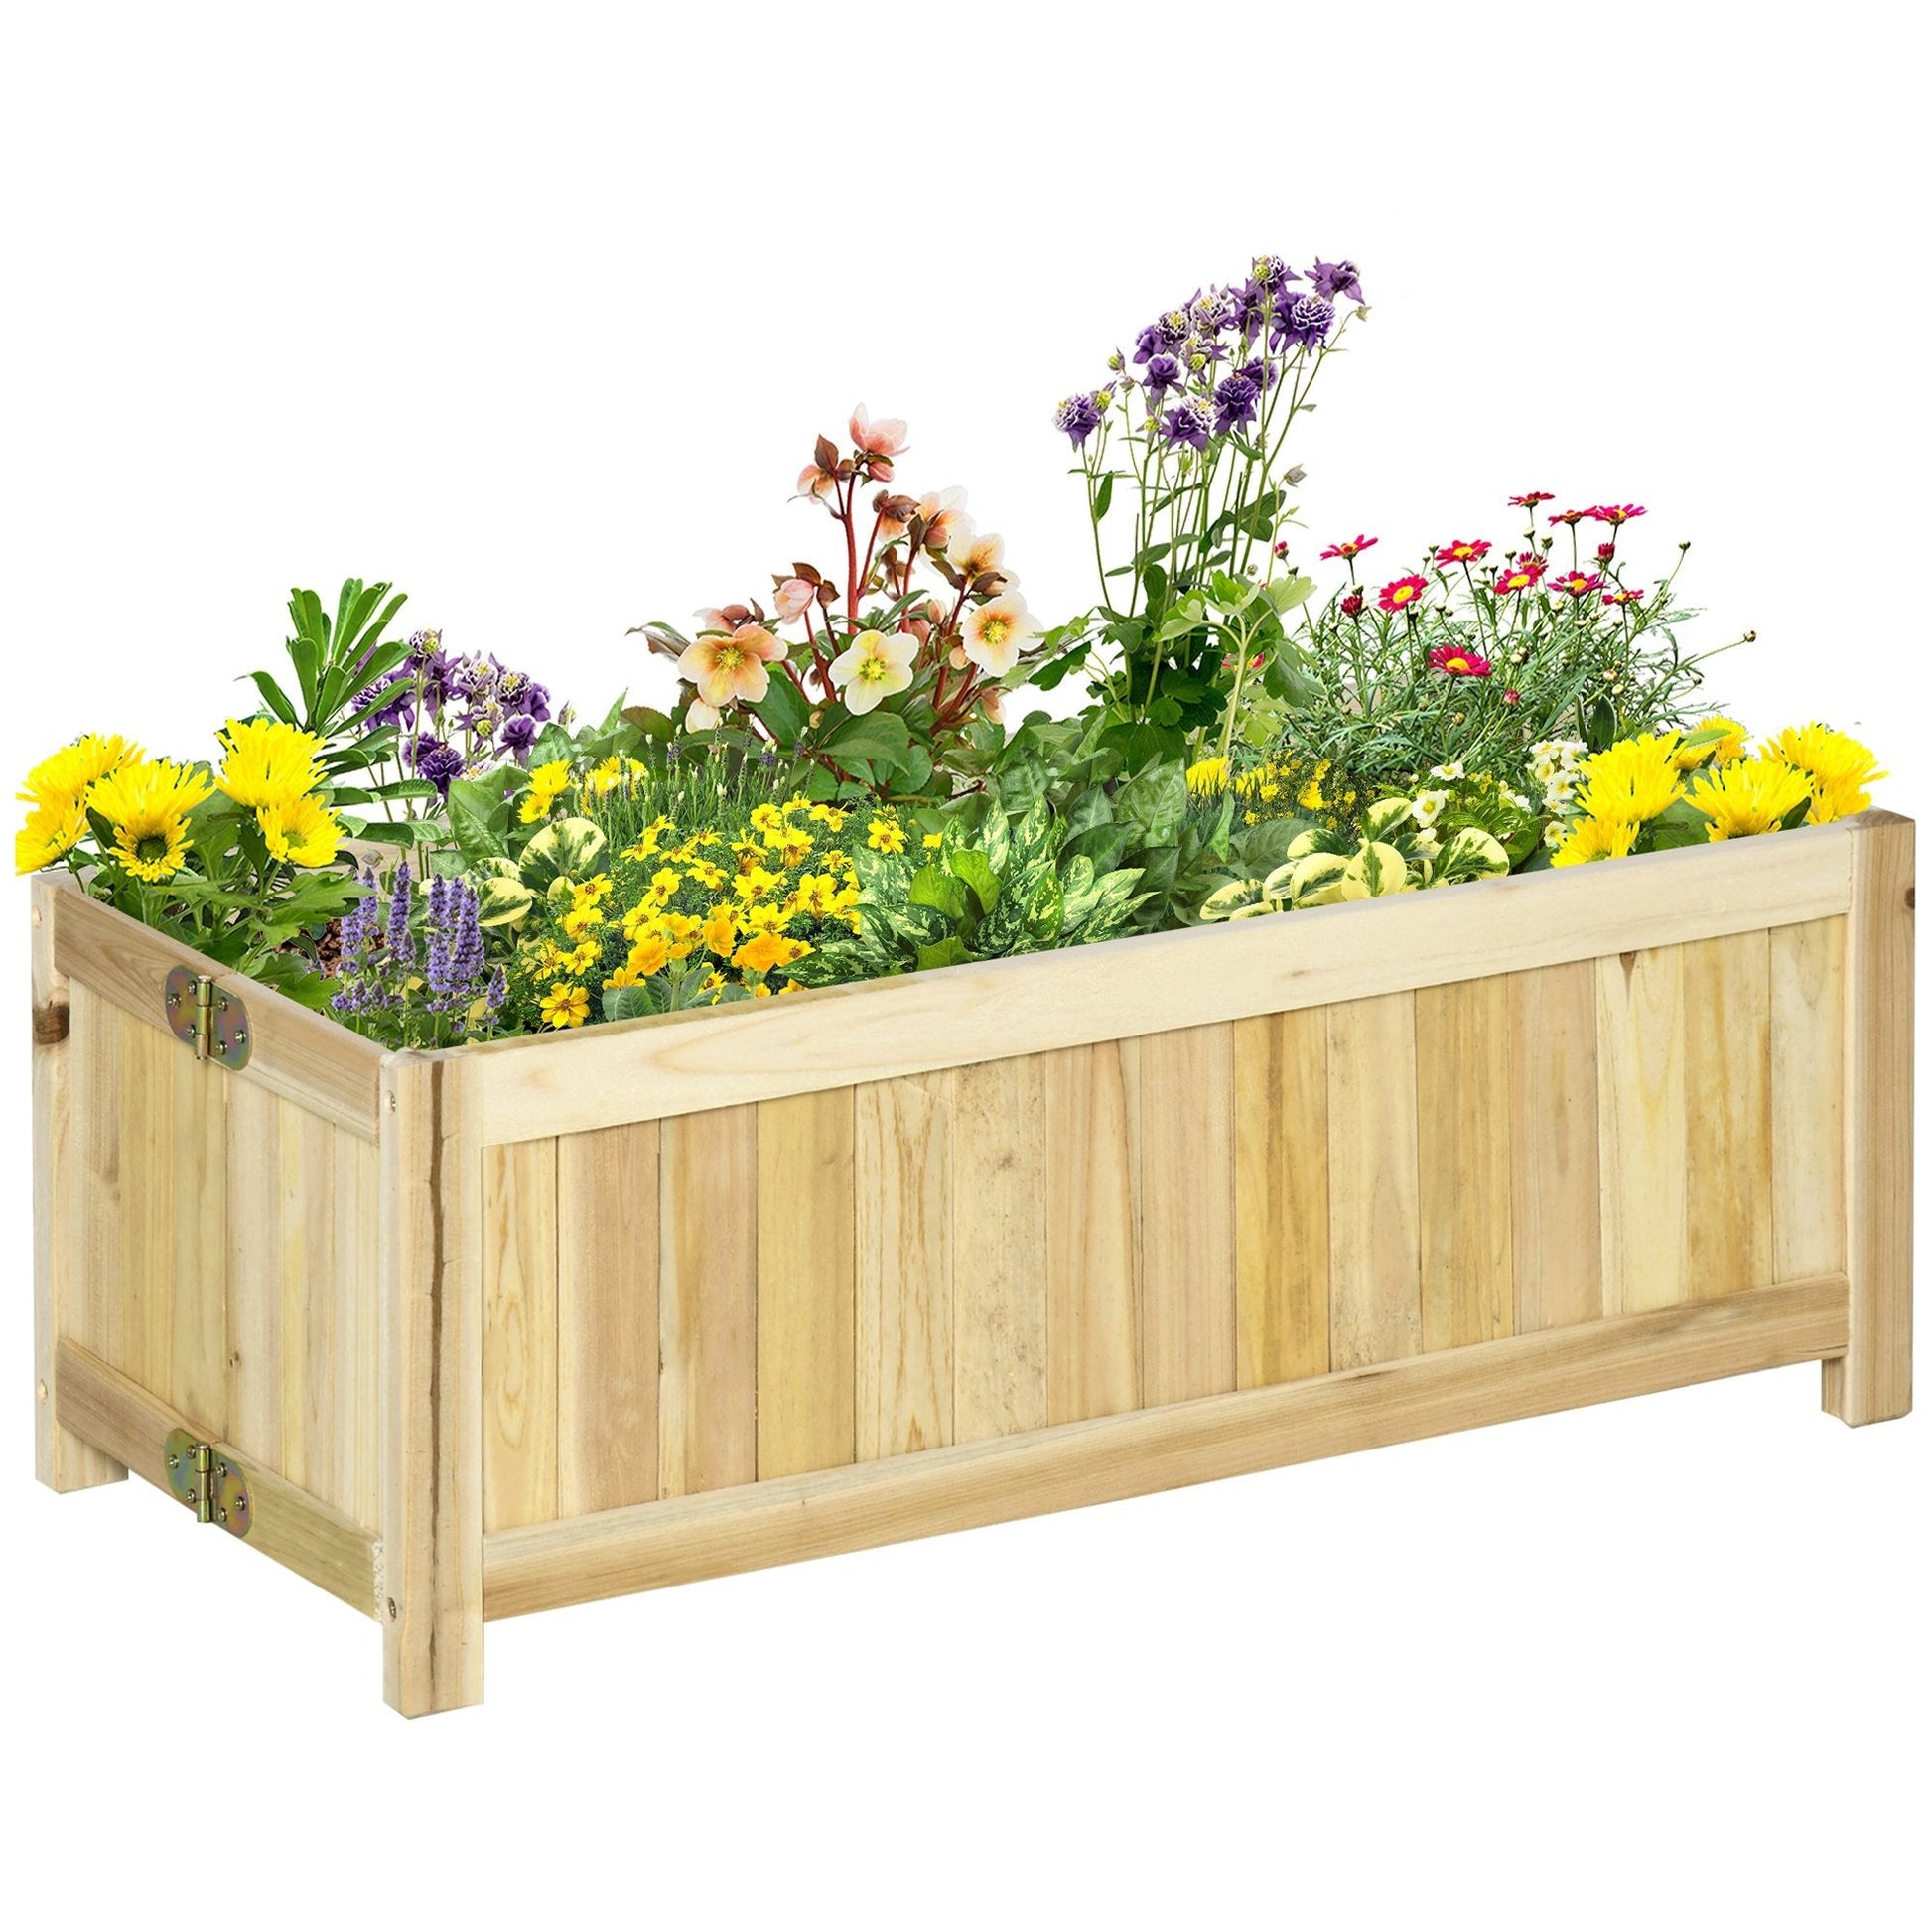 Foldable Elevated Planter Box, Wooden Raised Garden Bed for Backyard, Patio to Grow Vegetables, Herbs, Flowers, Natural at Gallery Canada